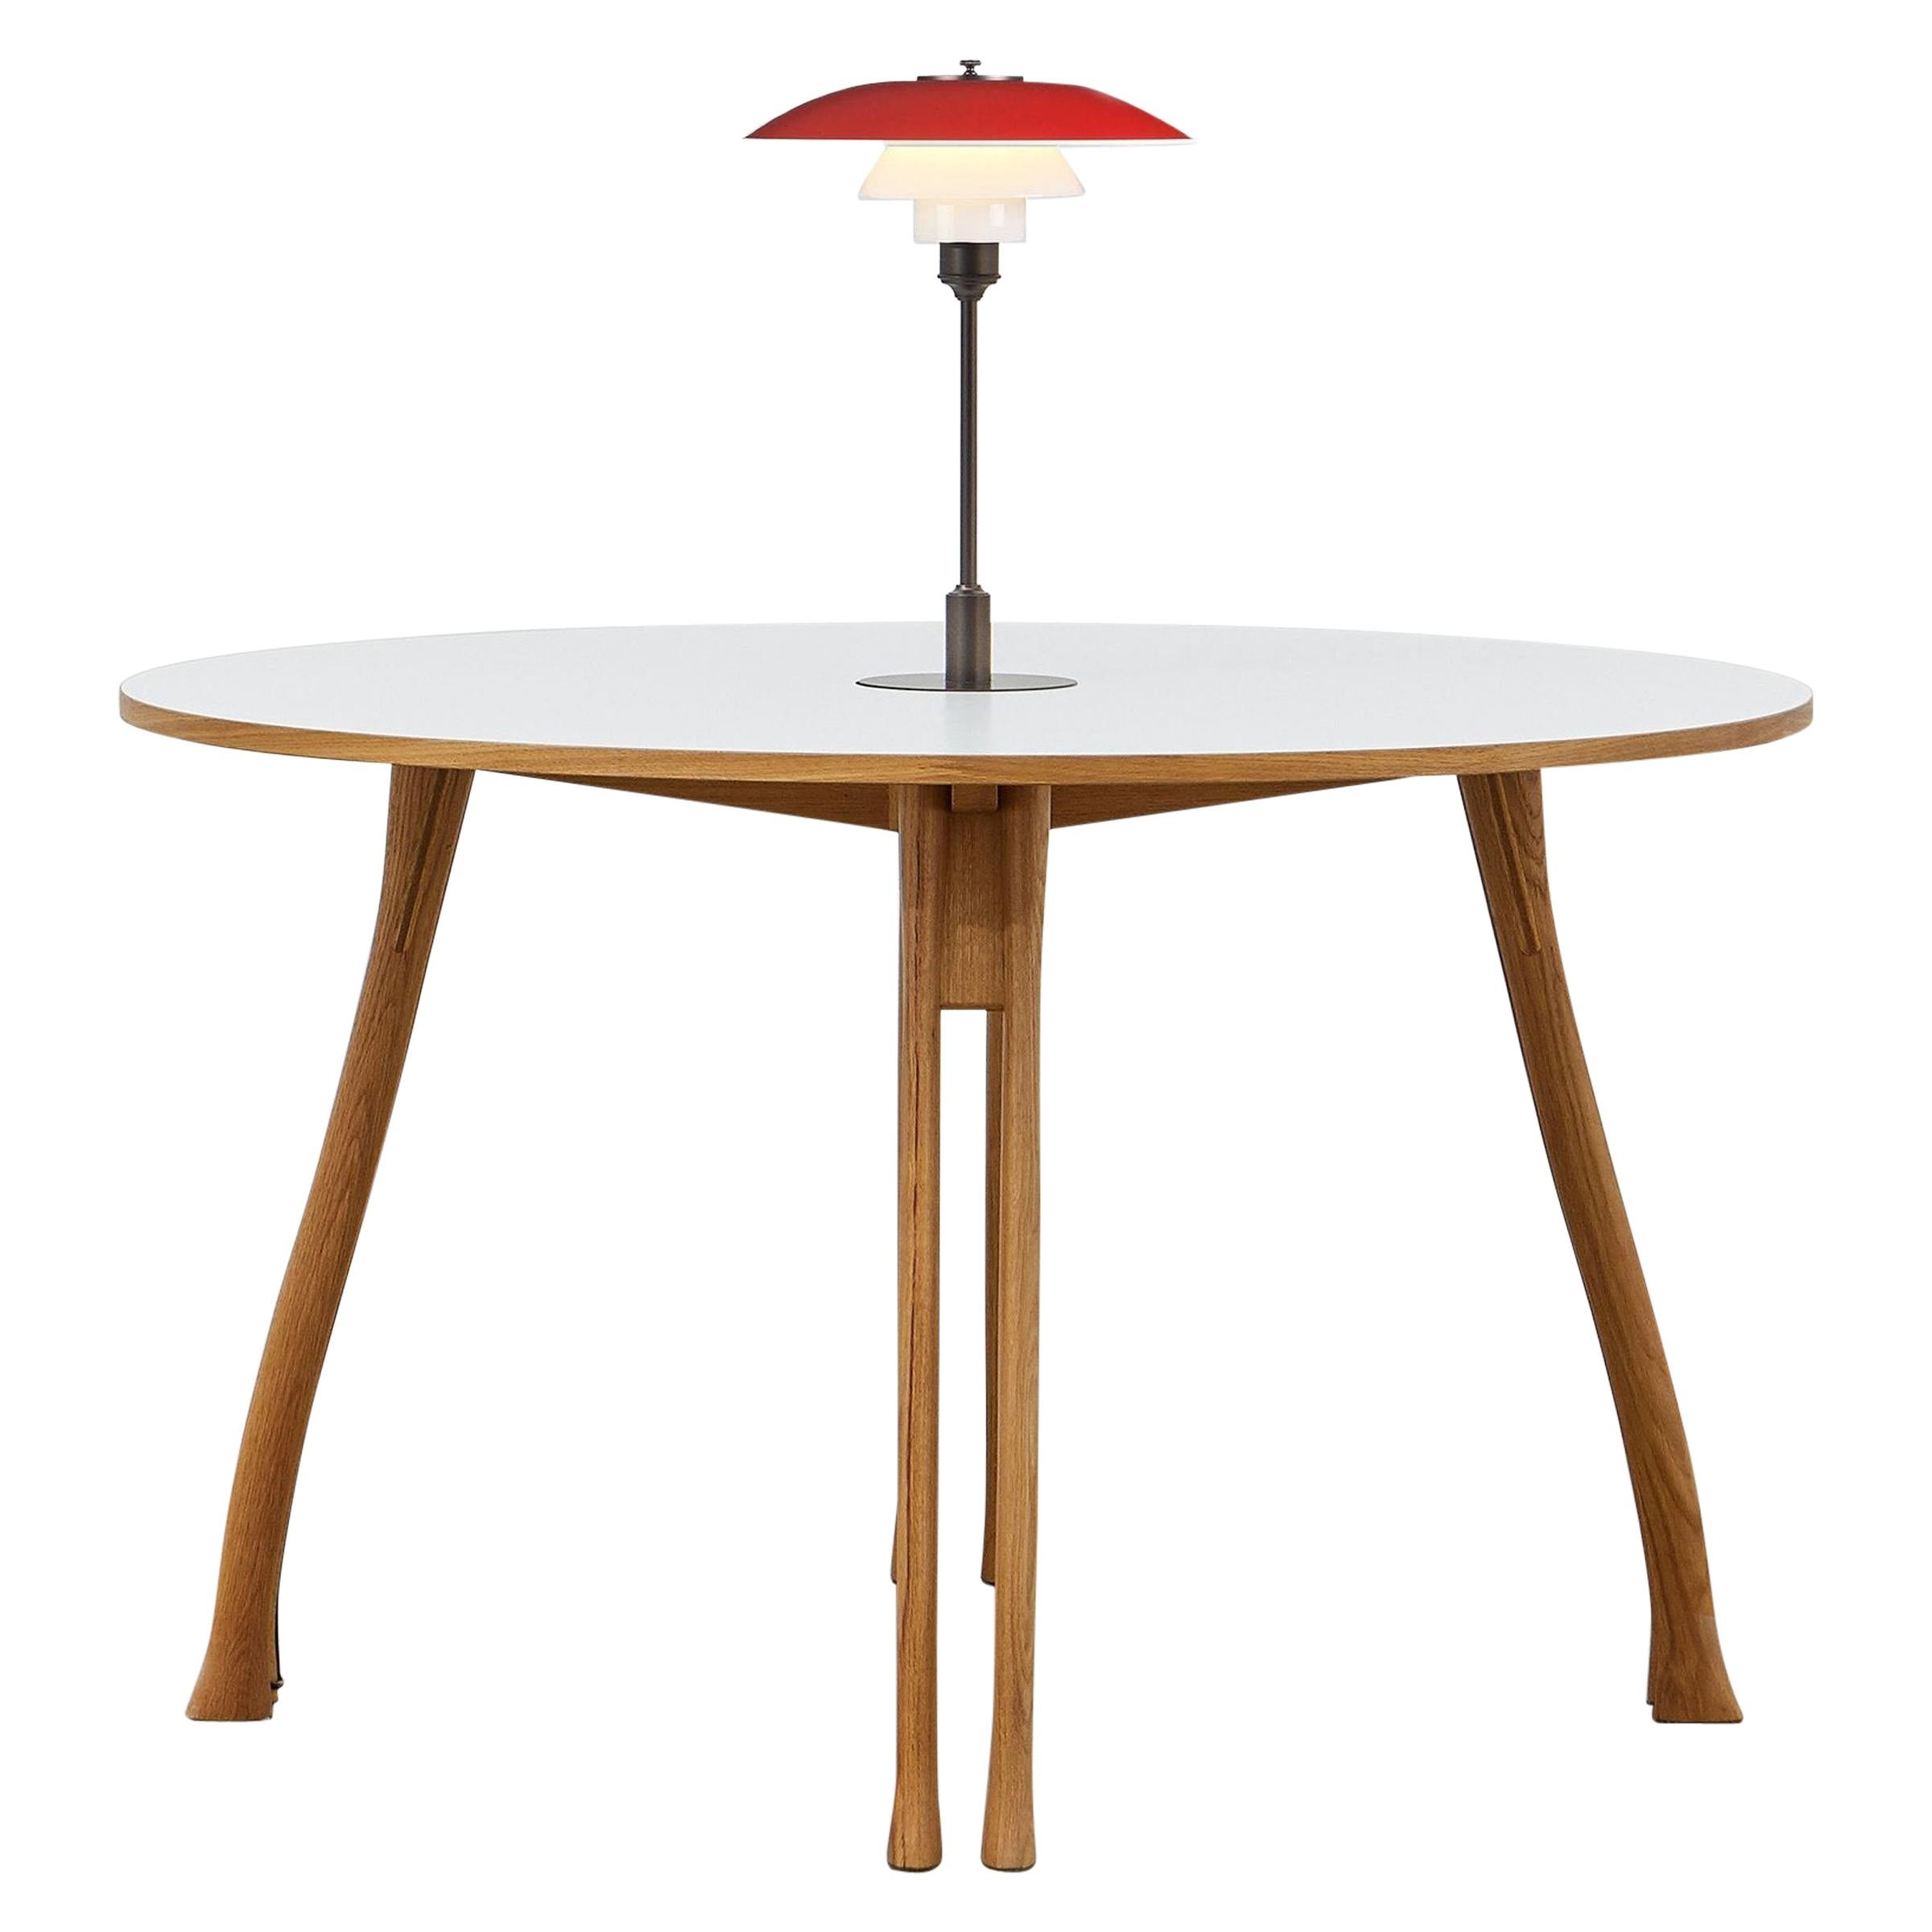 PH Axe Table, Natural Oak Legs, Laminated Plate, Red PH 3 ½ - 2 ½ Lamp For Sale